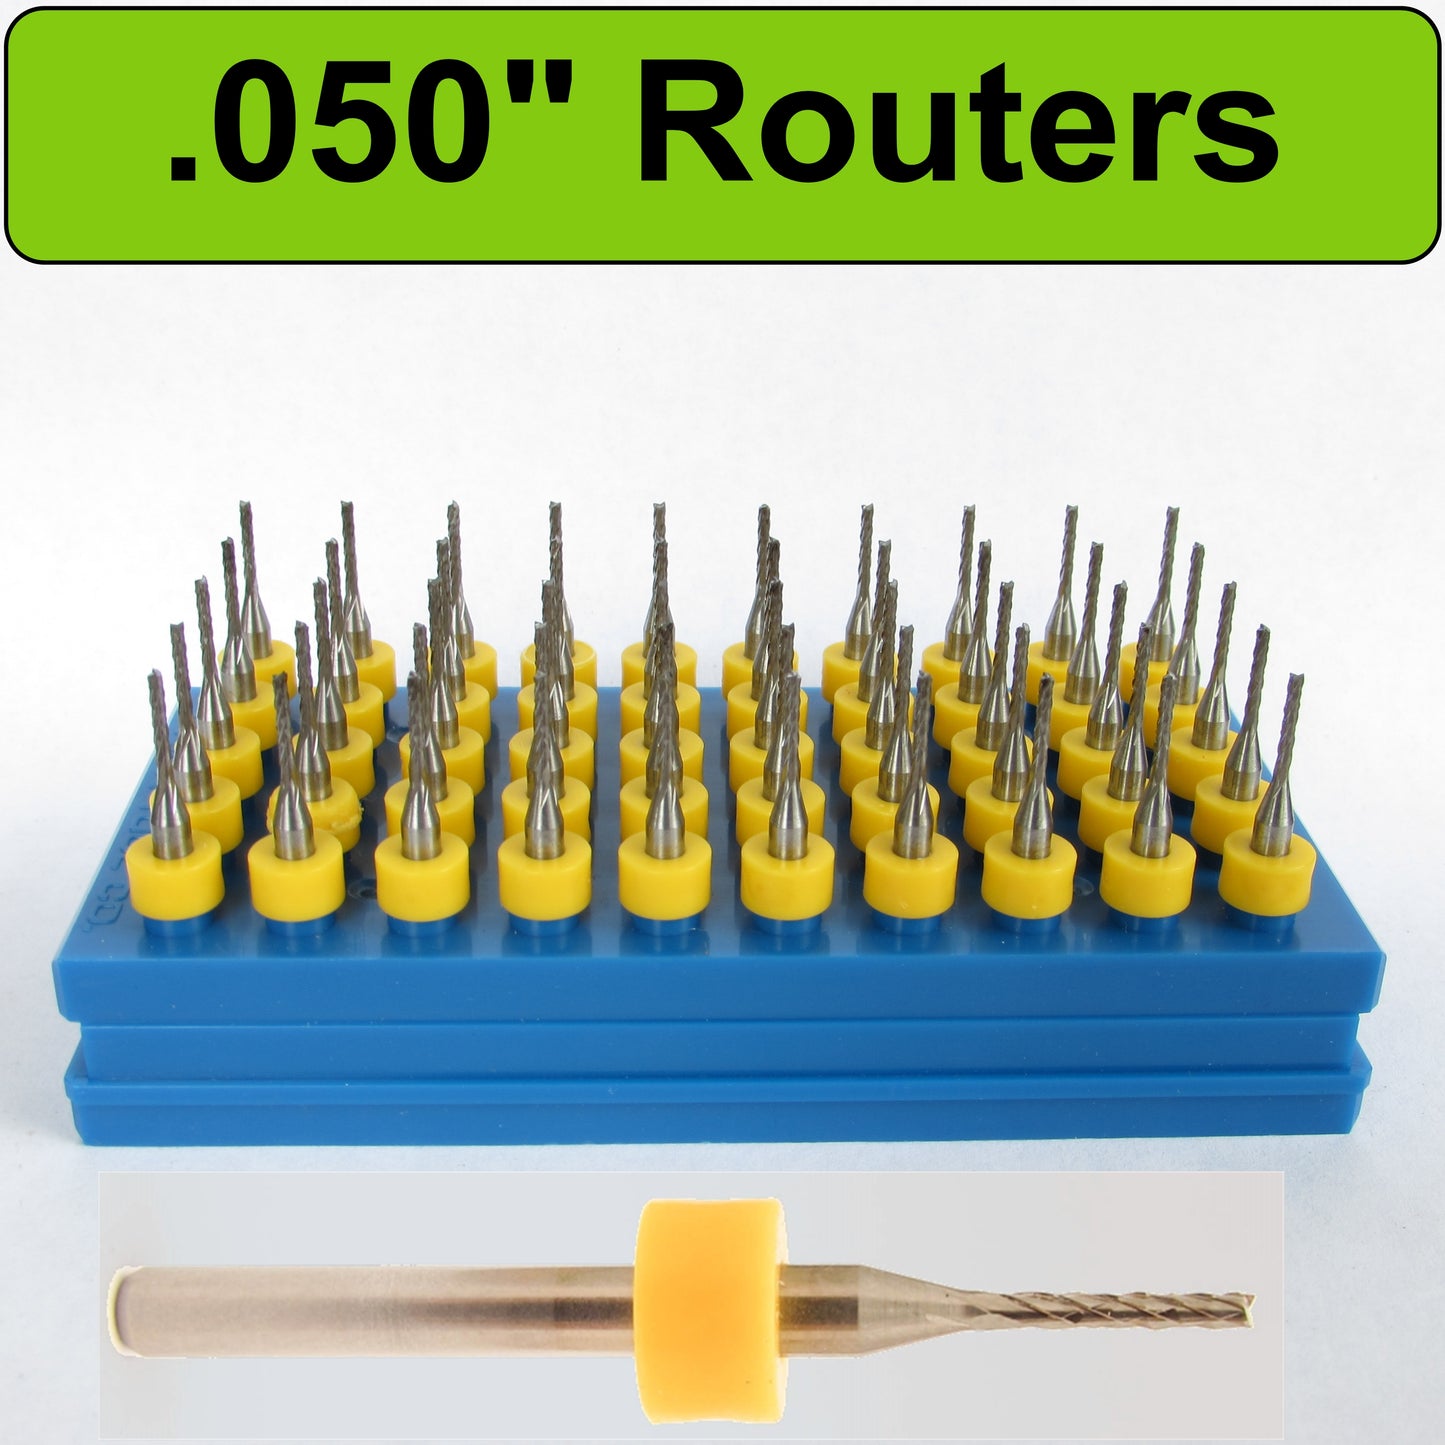 Fifty Pieces .050" Router Bits Diamond Flutes 1/8" Shanks Fish Tail Tip - Up Cut Solid Carbide - Super Value - URD120